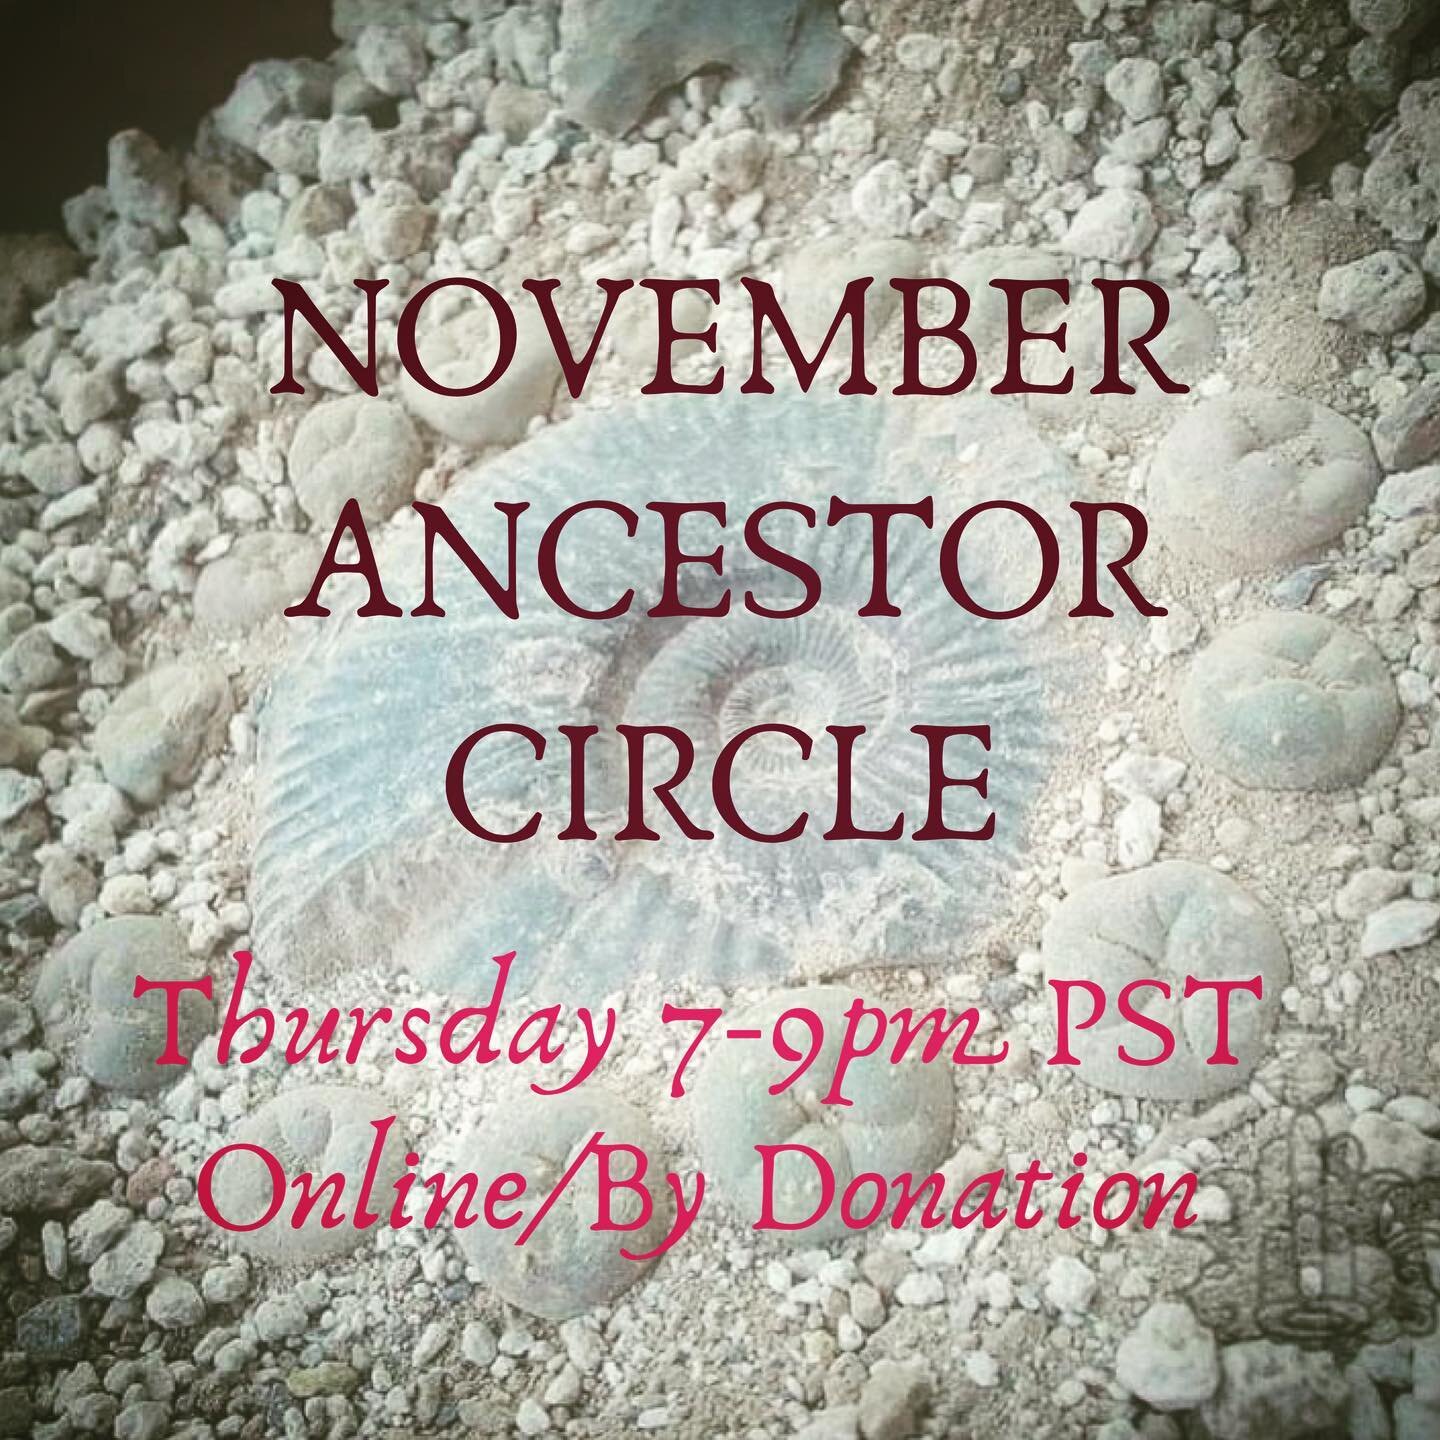 Join me Thursday Nov 19th for our monthly community ancestor circle via zoom! By donation, RSVP required. Link to meetup in bio. #ancestors #ancestralhealing #rootwisdom #ancestralwisdom